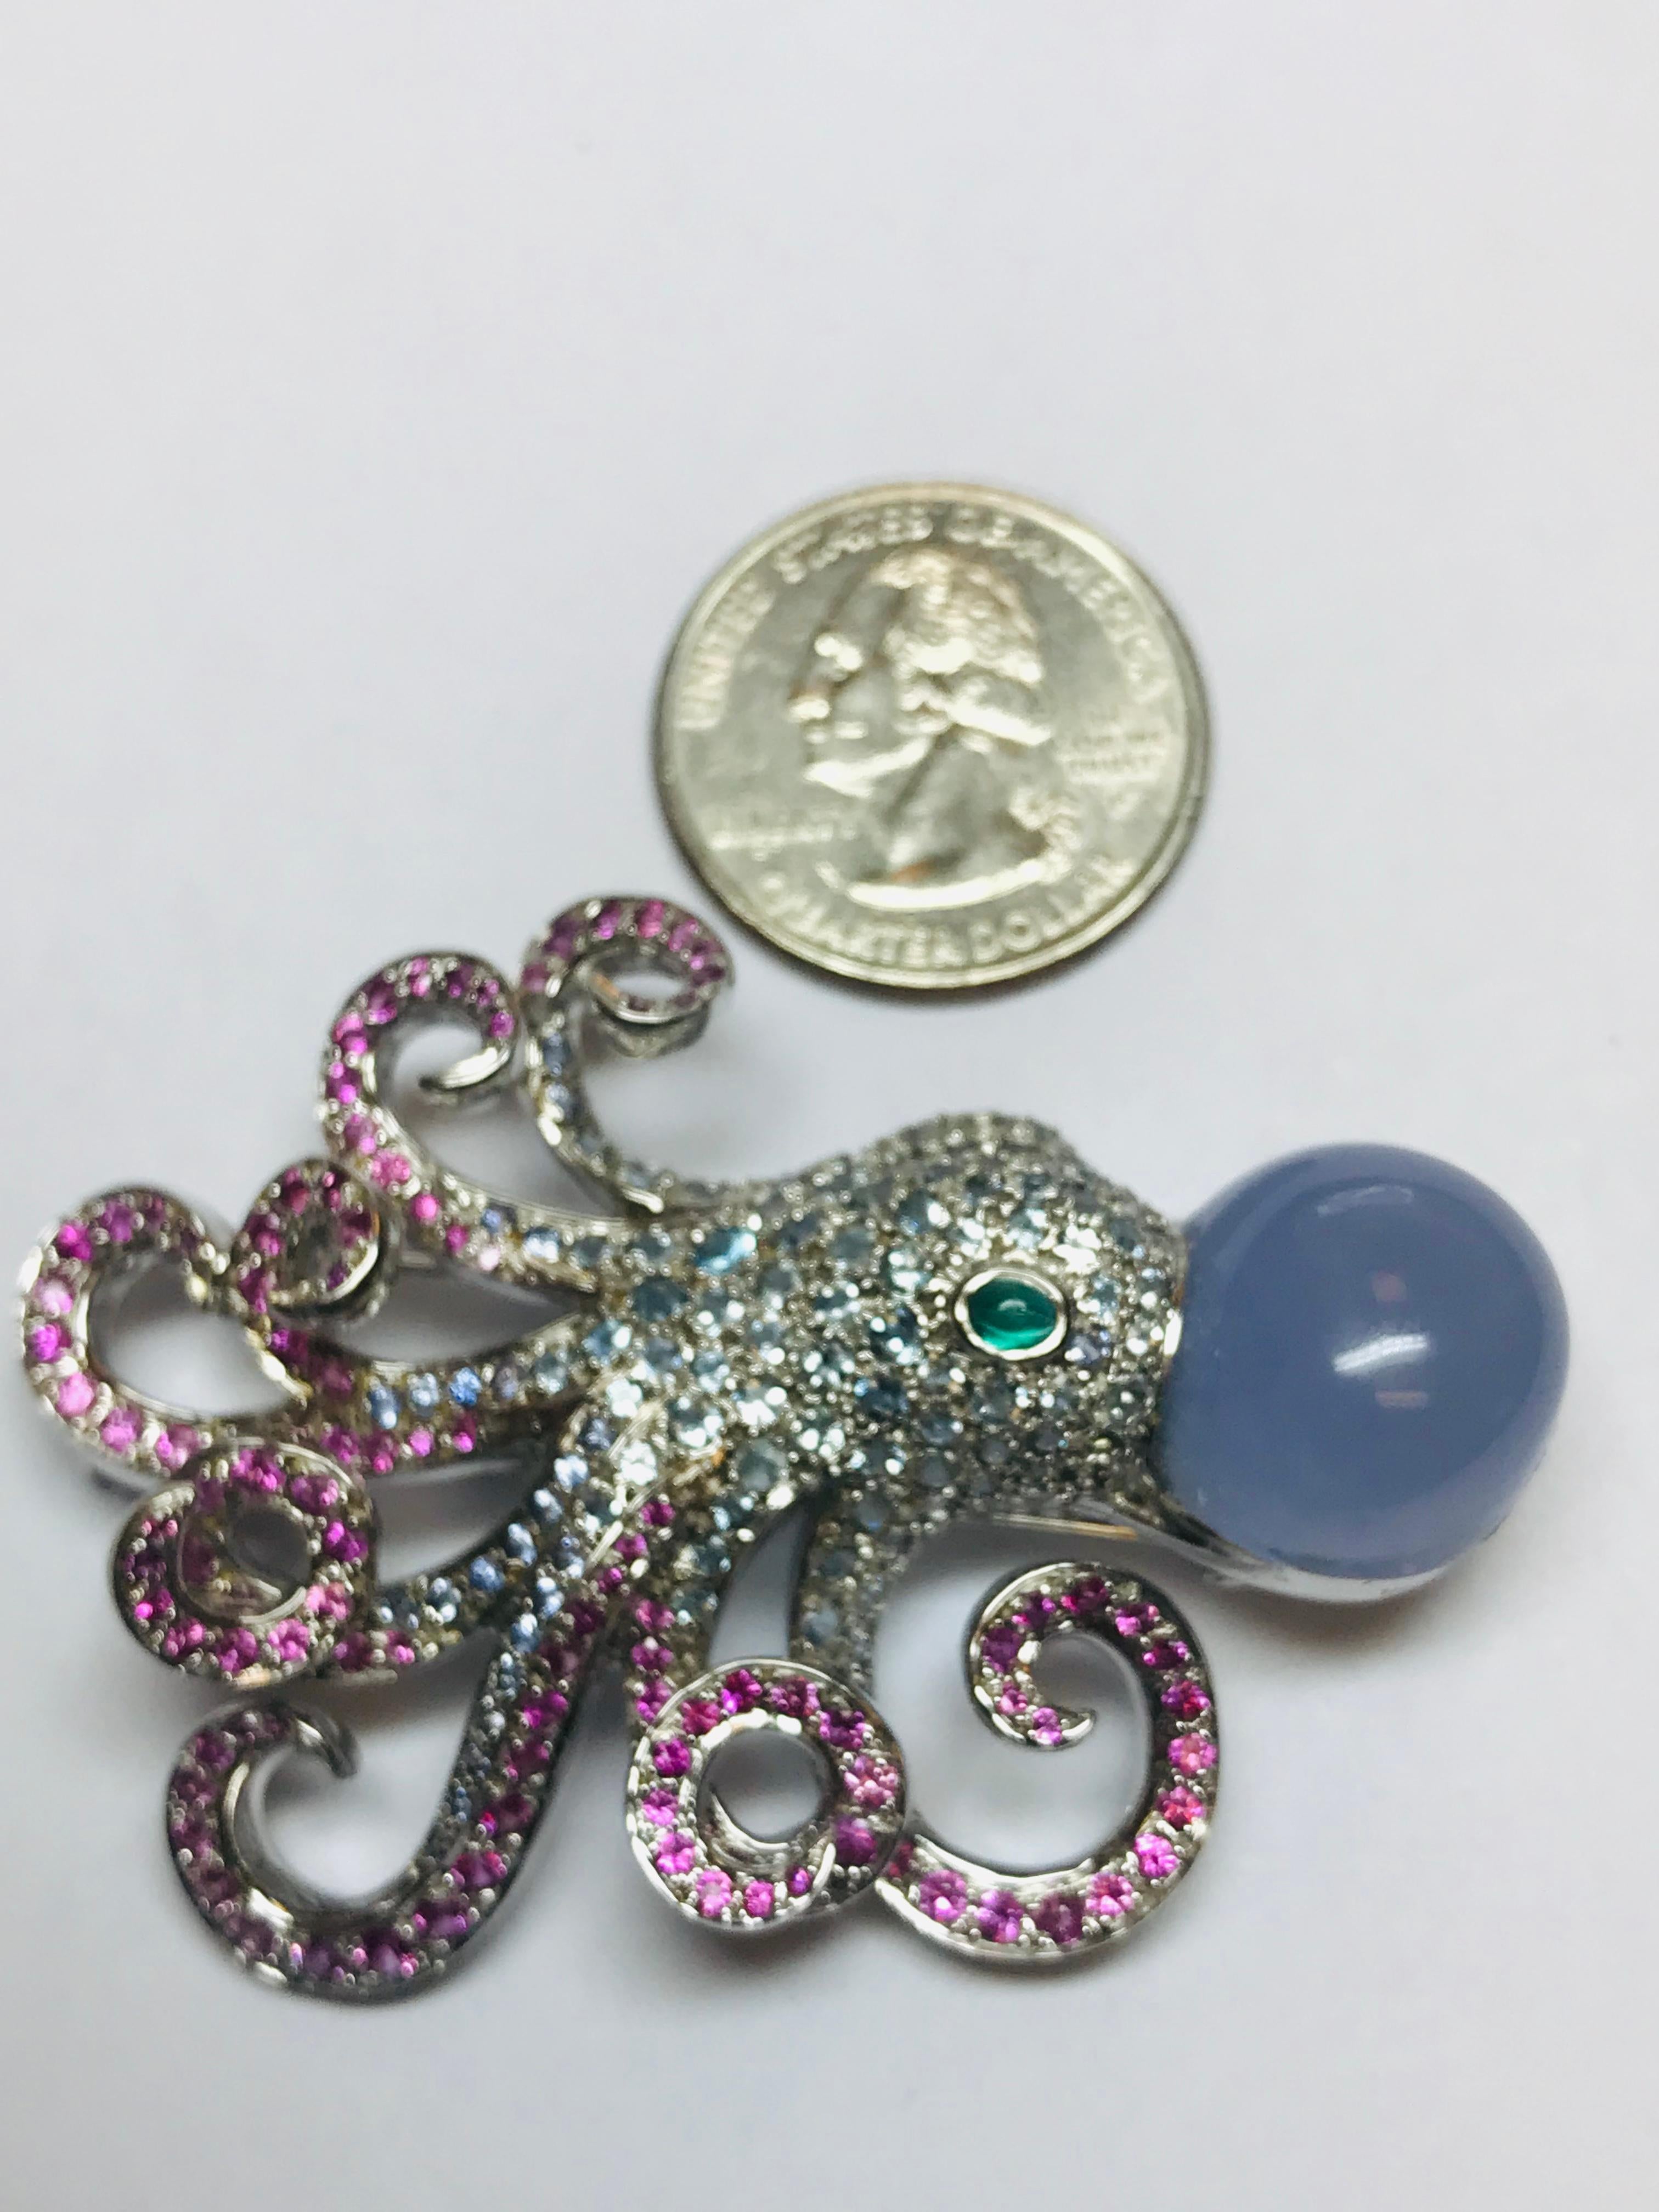 This whimsical 18k white gold Jean Vitau Octopus brooch combines 4.00 carats of light blue Aquamarines in the body with 2.75 carats of Pink Sapphire and a beautiful cabochon Chalcedony, finished off with an emerald eye. So incredibly manufactured